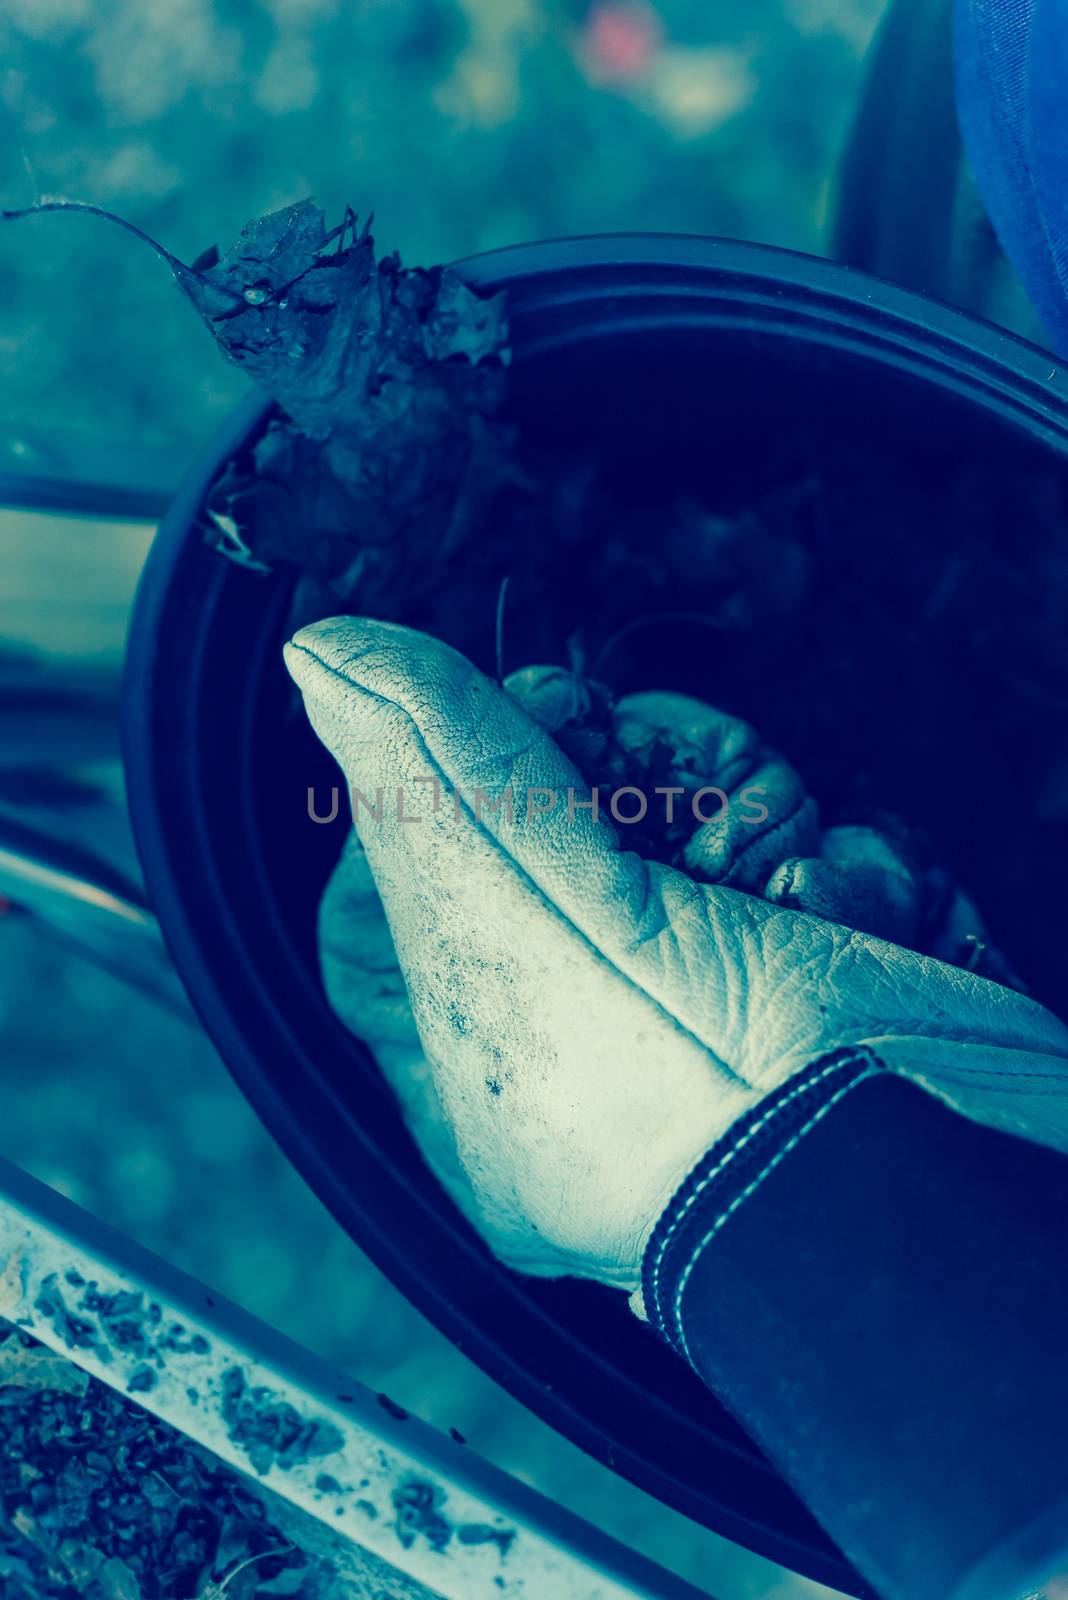 Filtered image close-up hand with gloves drop dried leaves and dirt into bucket from gutter cleaning by trongnguyen